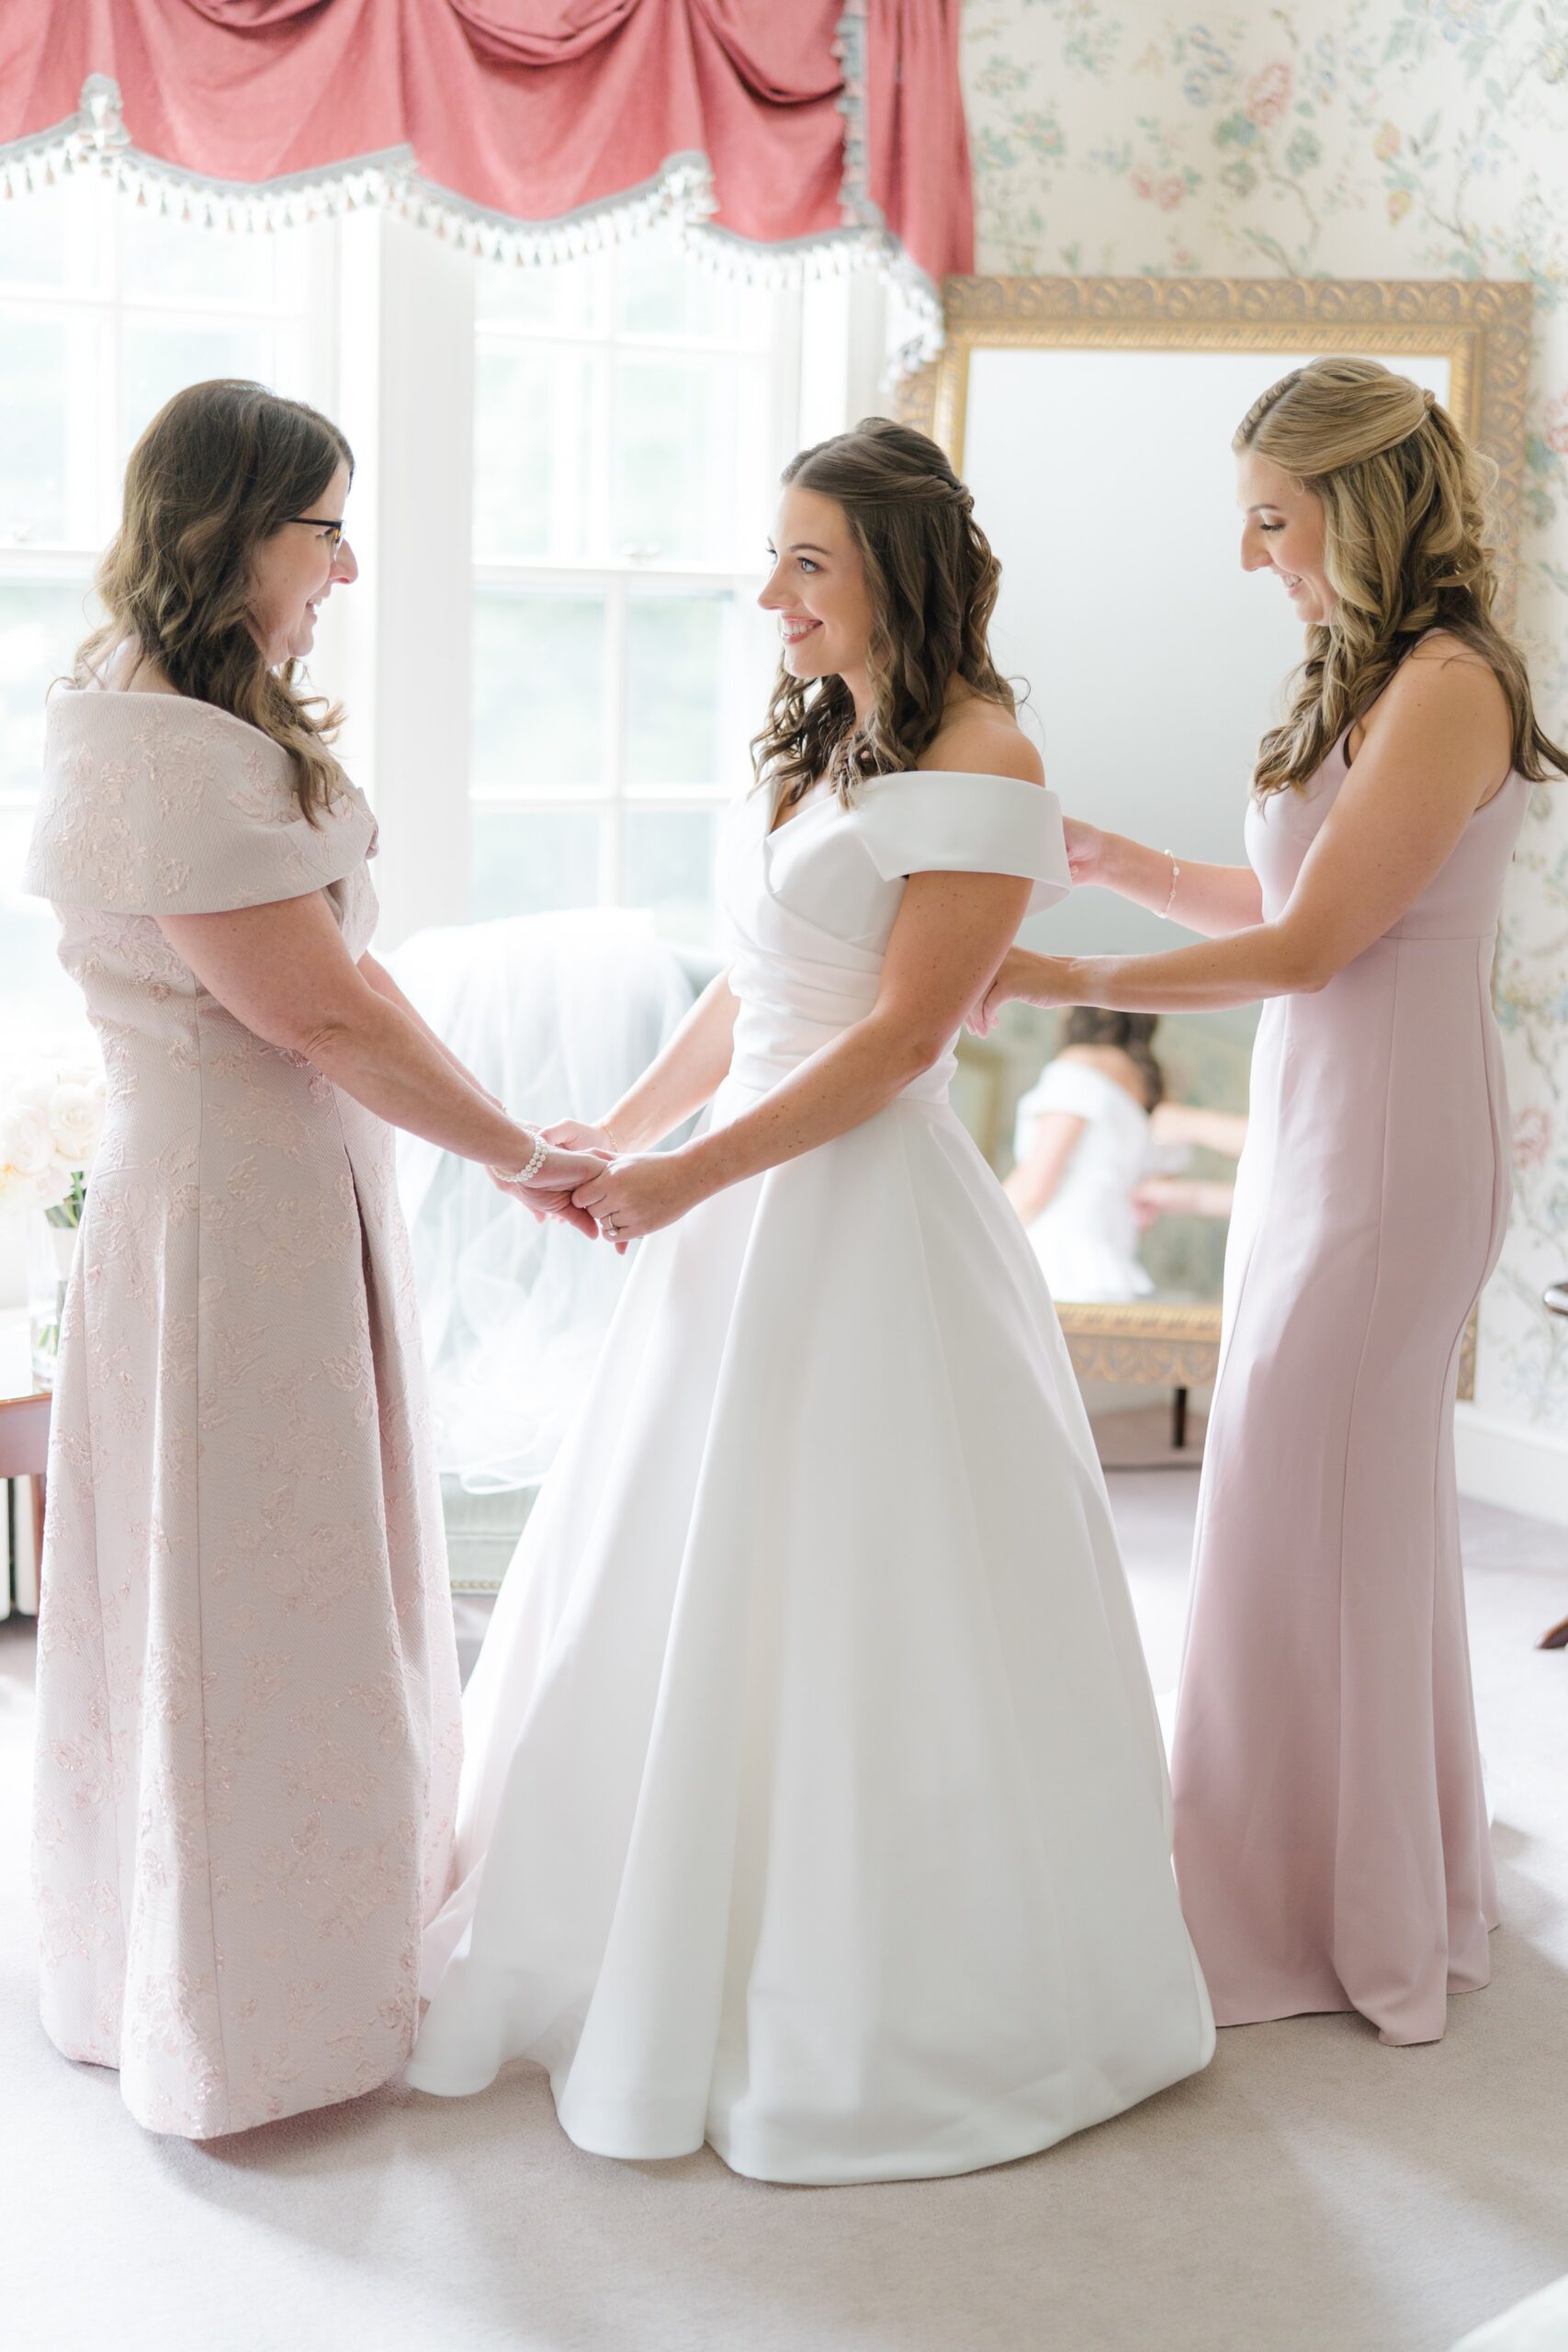 Bride and her mom share a moment while maid of honor finishes buttoning wedding dress.